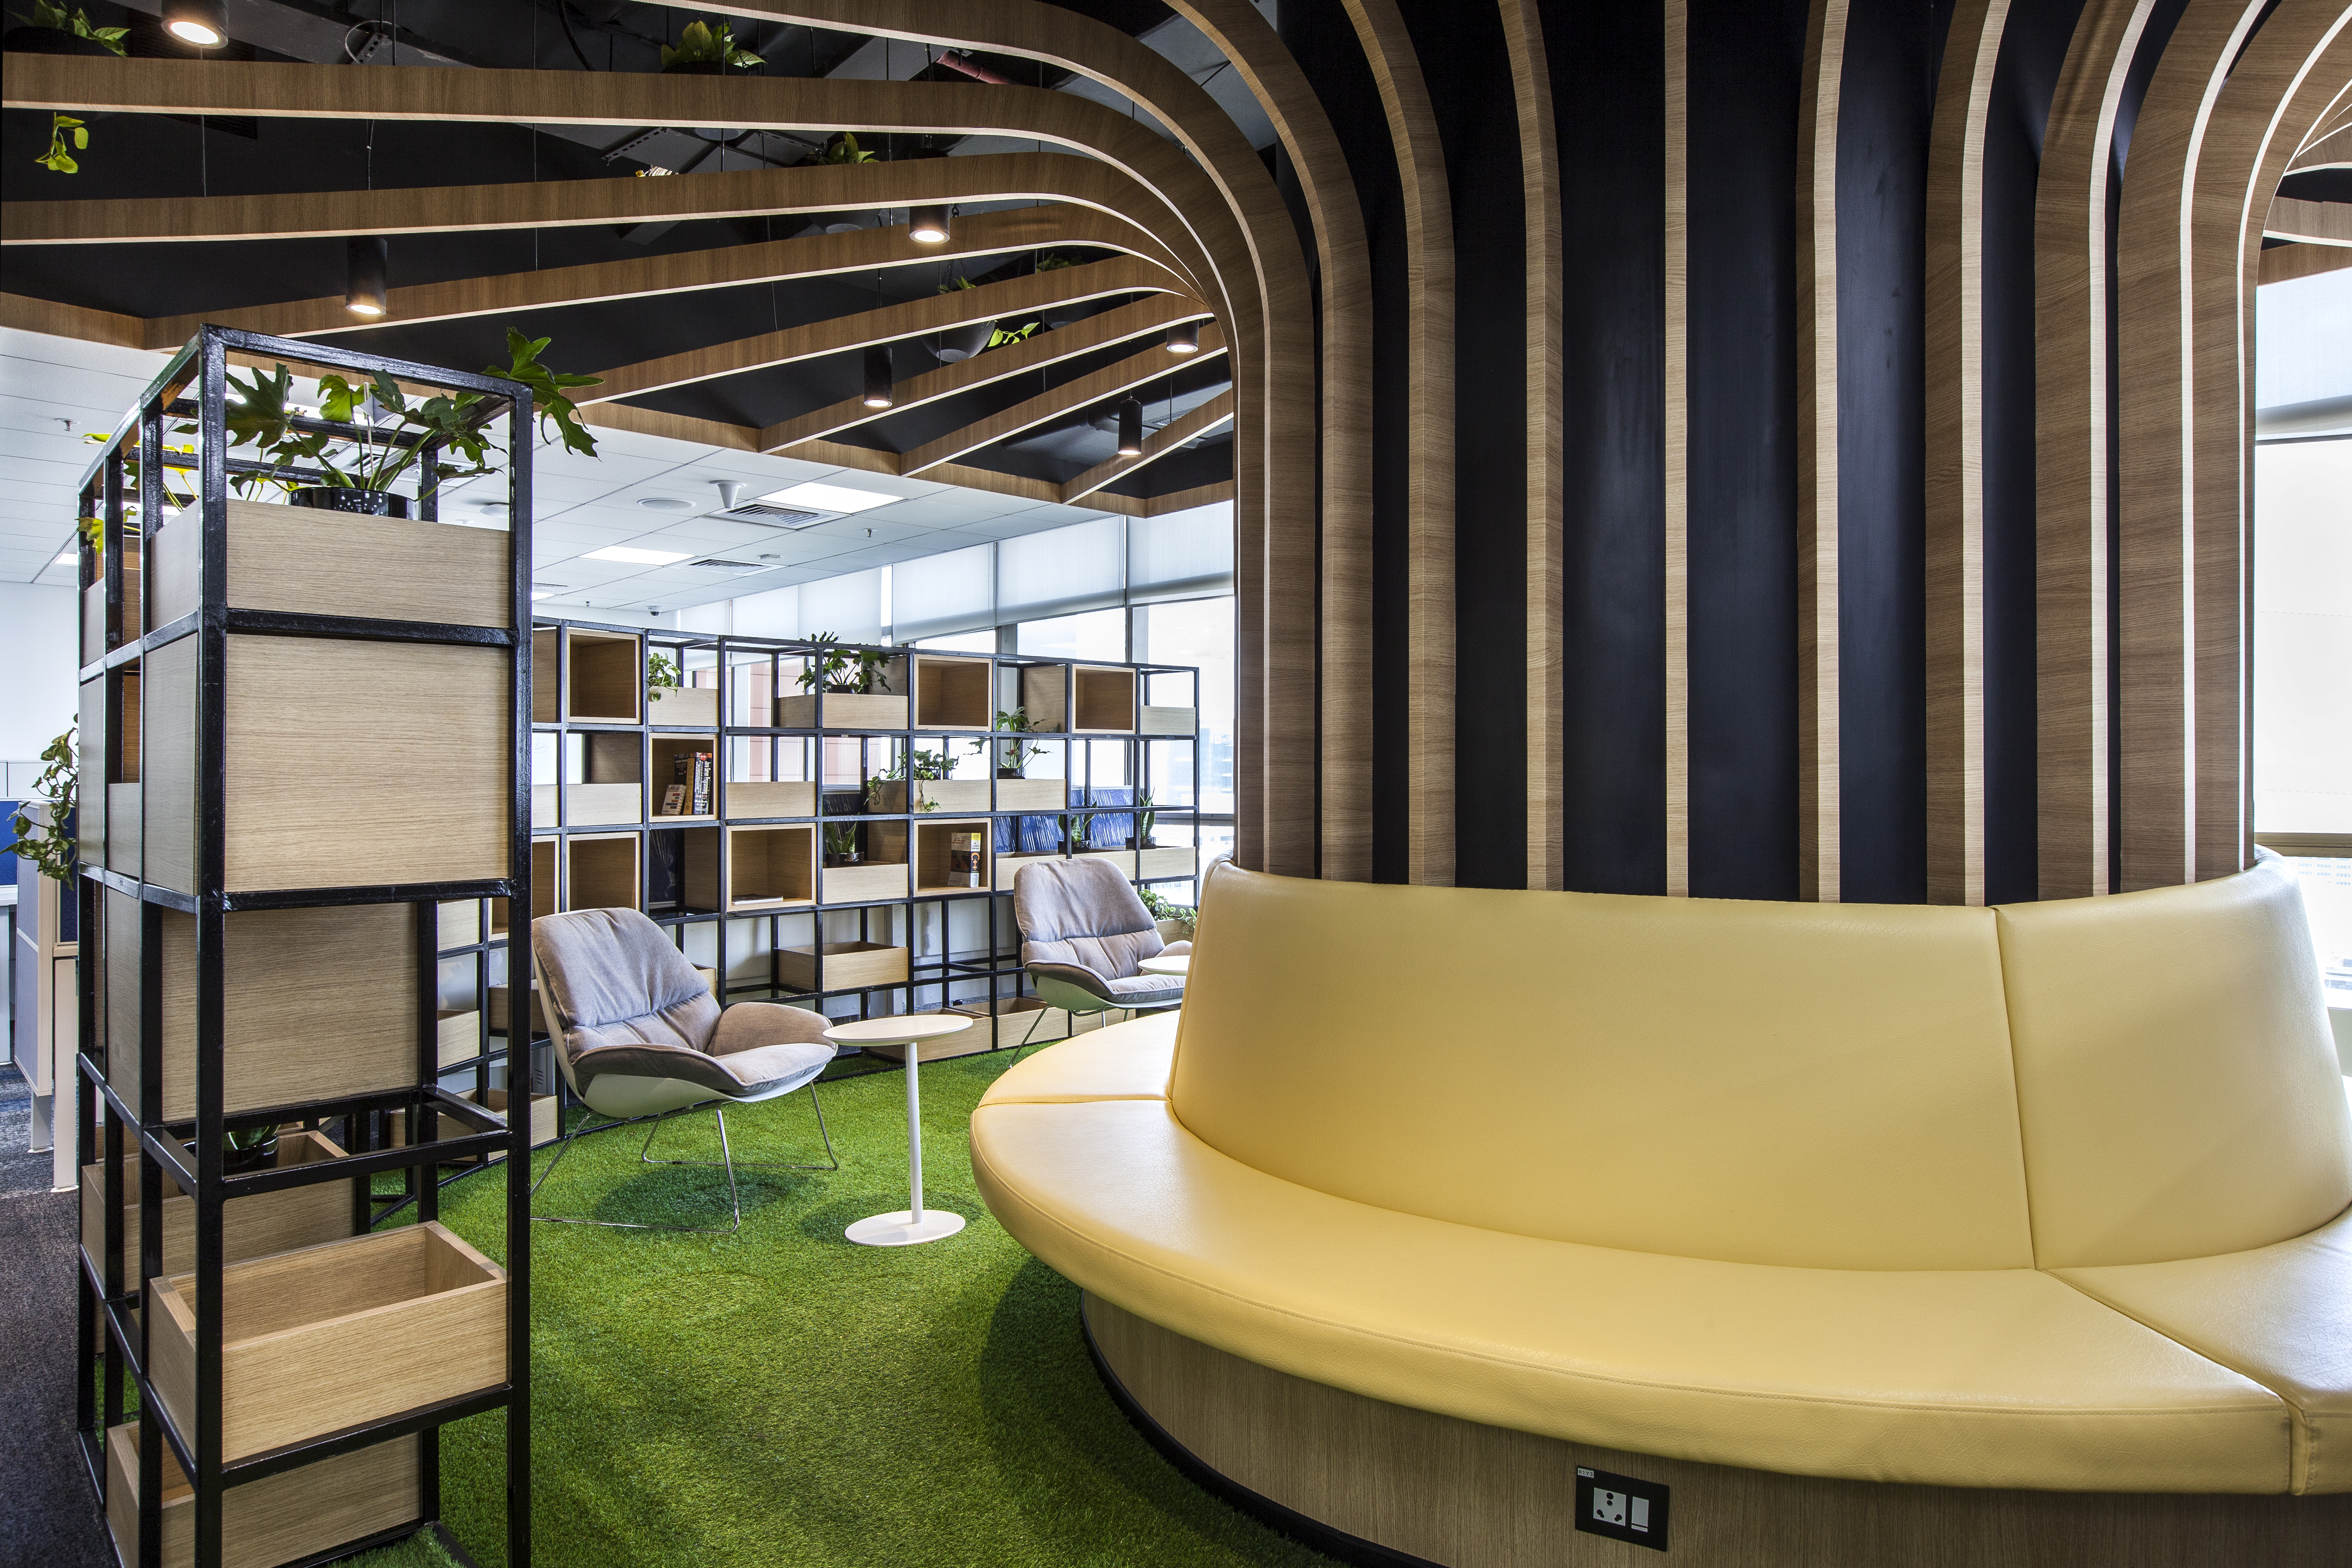 This pharma office designed its workspace to cater to the needs of its different departments